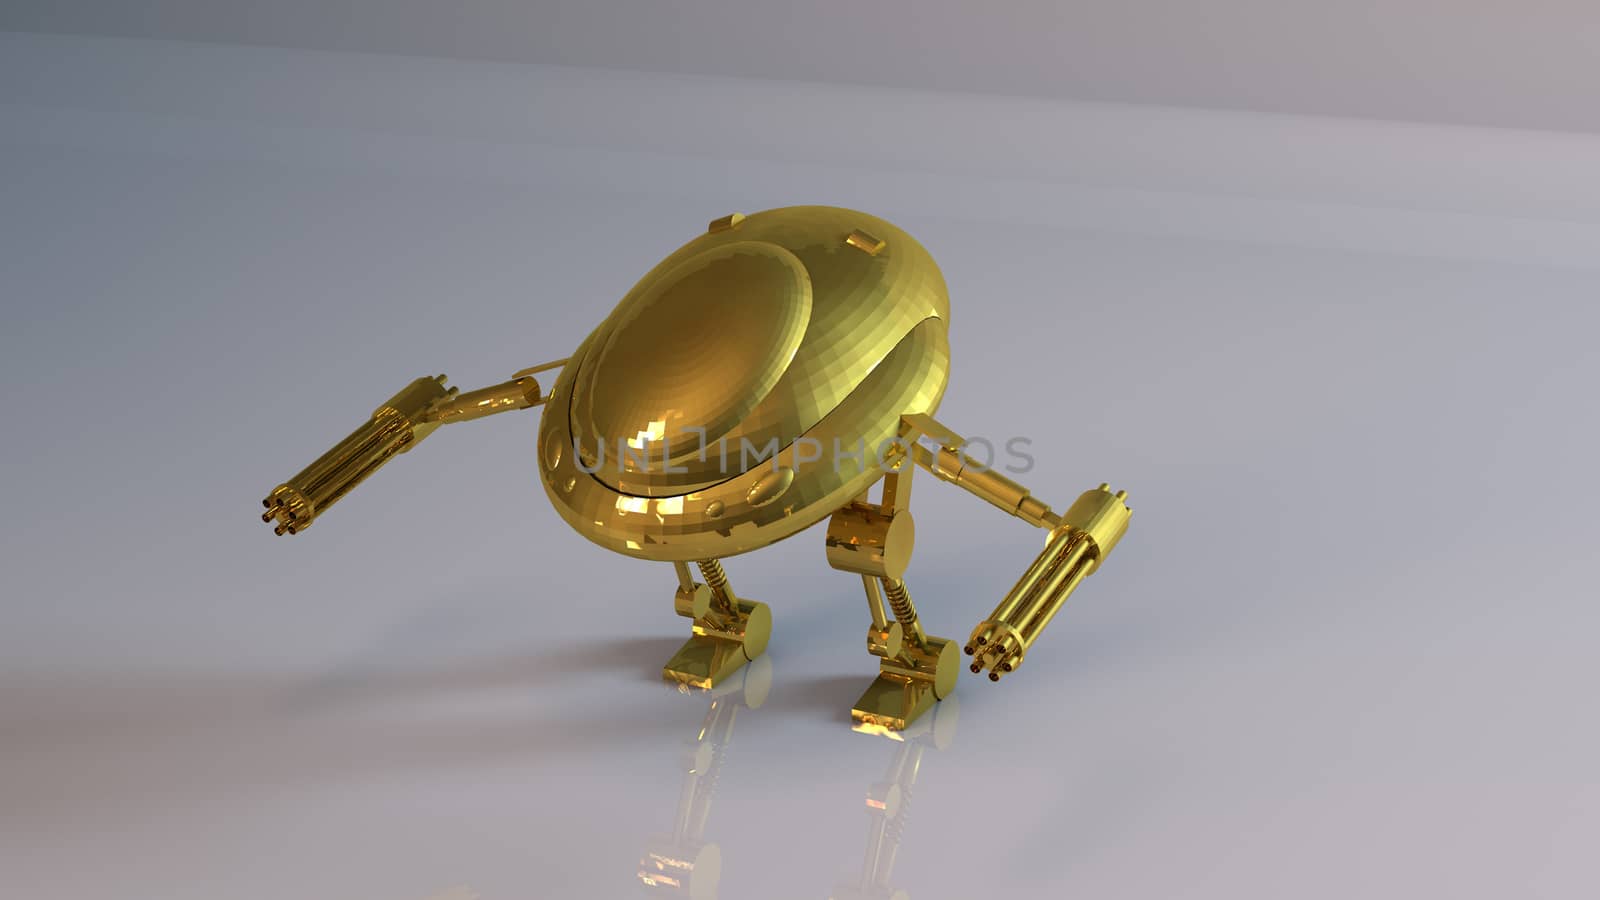 Golden 3D object (Robot) inside a white reflected stage with high render quality to be used as a logo, medal, symbol, shape, emblem, icon, business, geometric, label or any other use